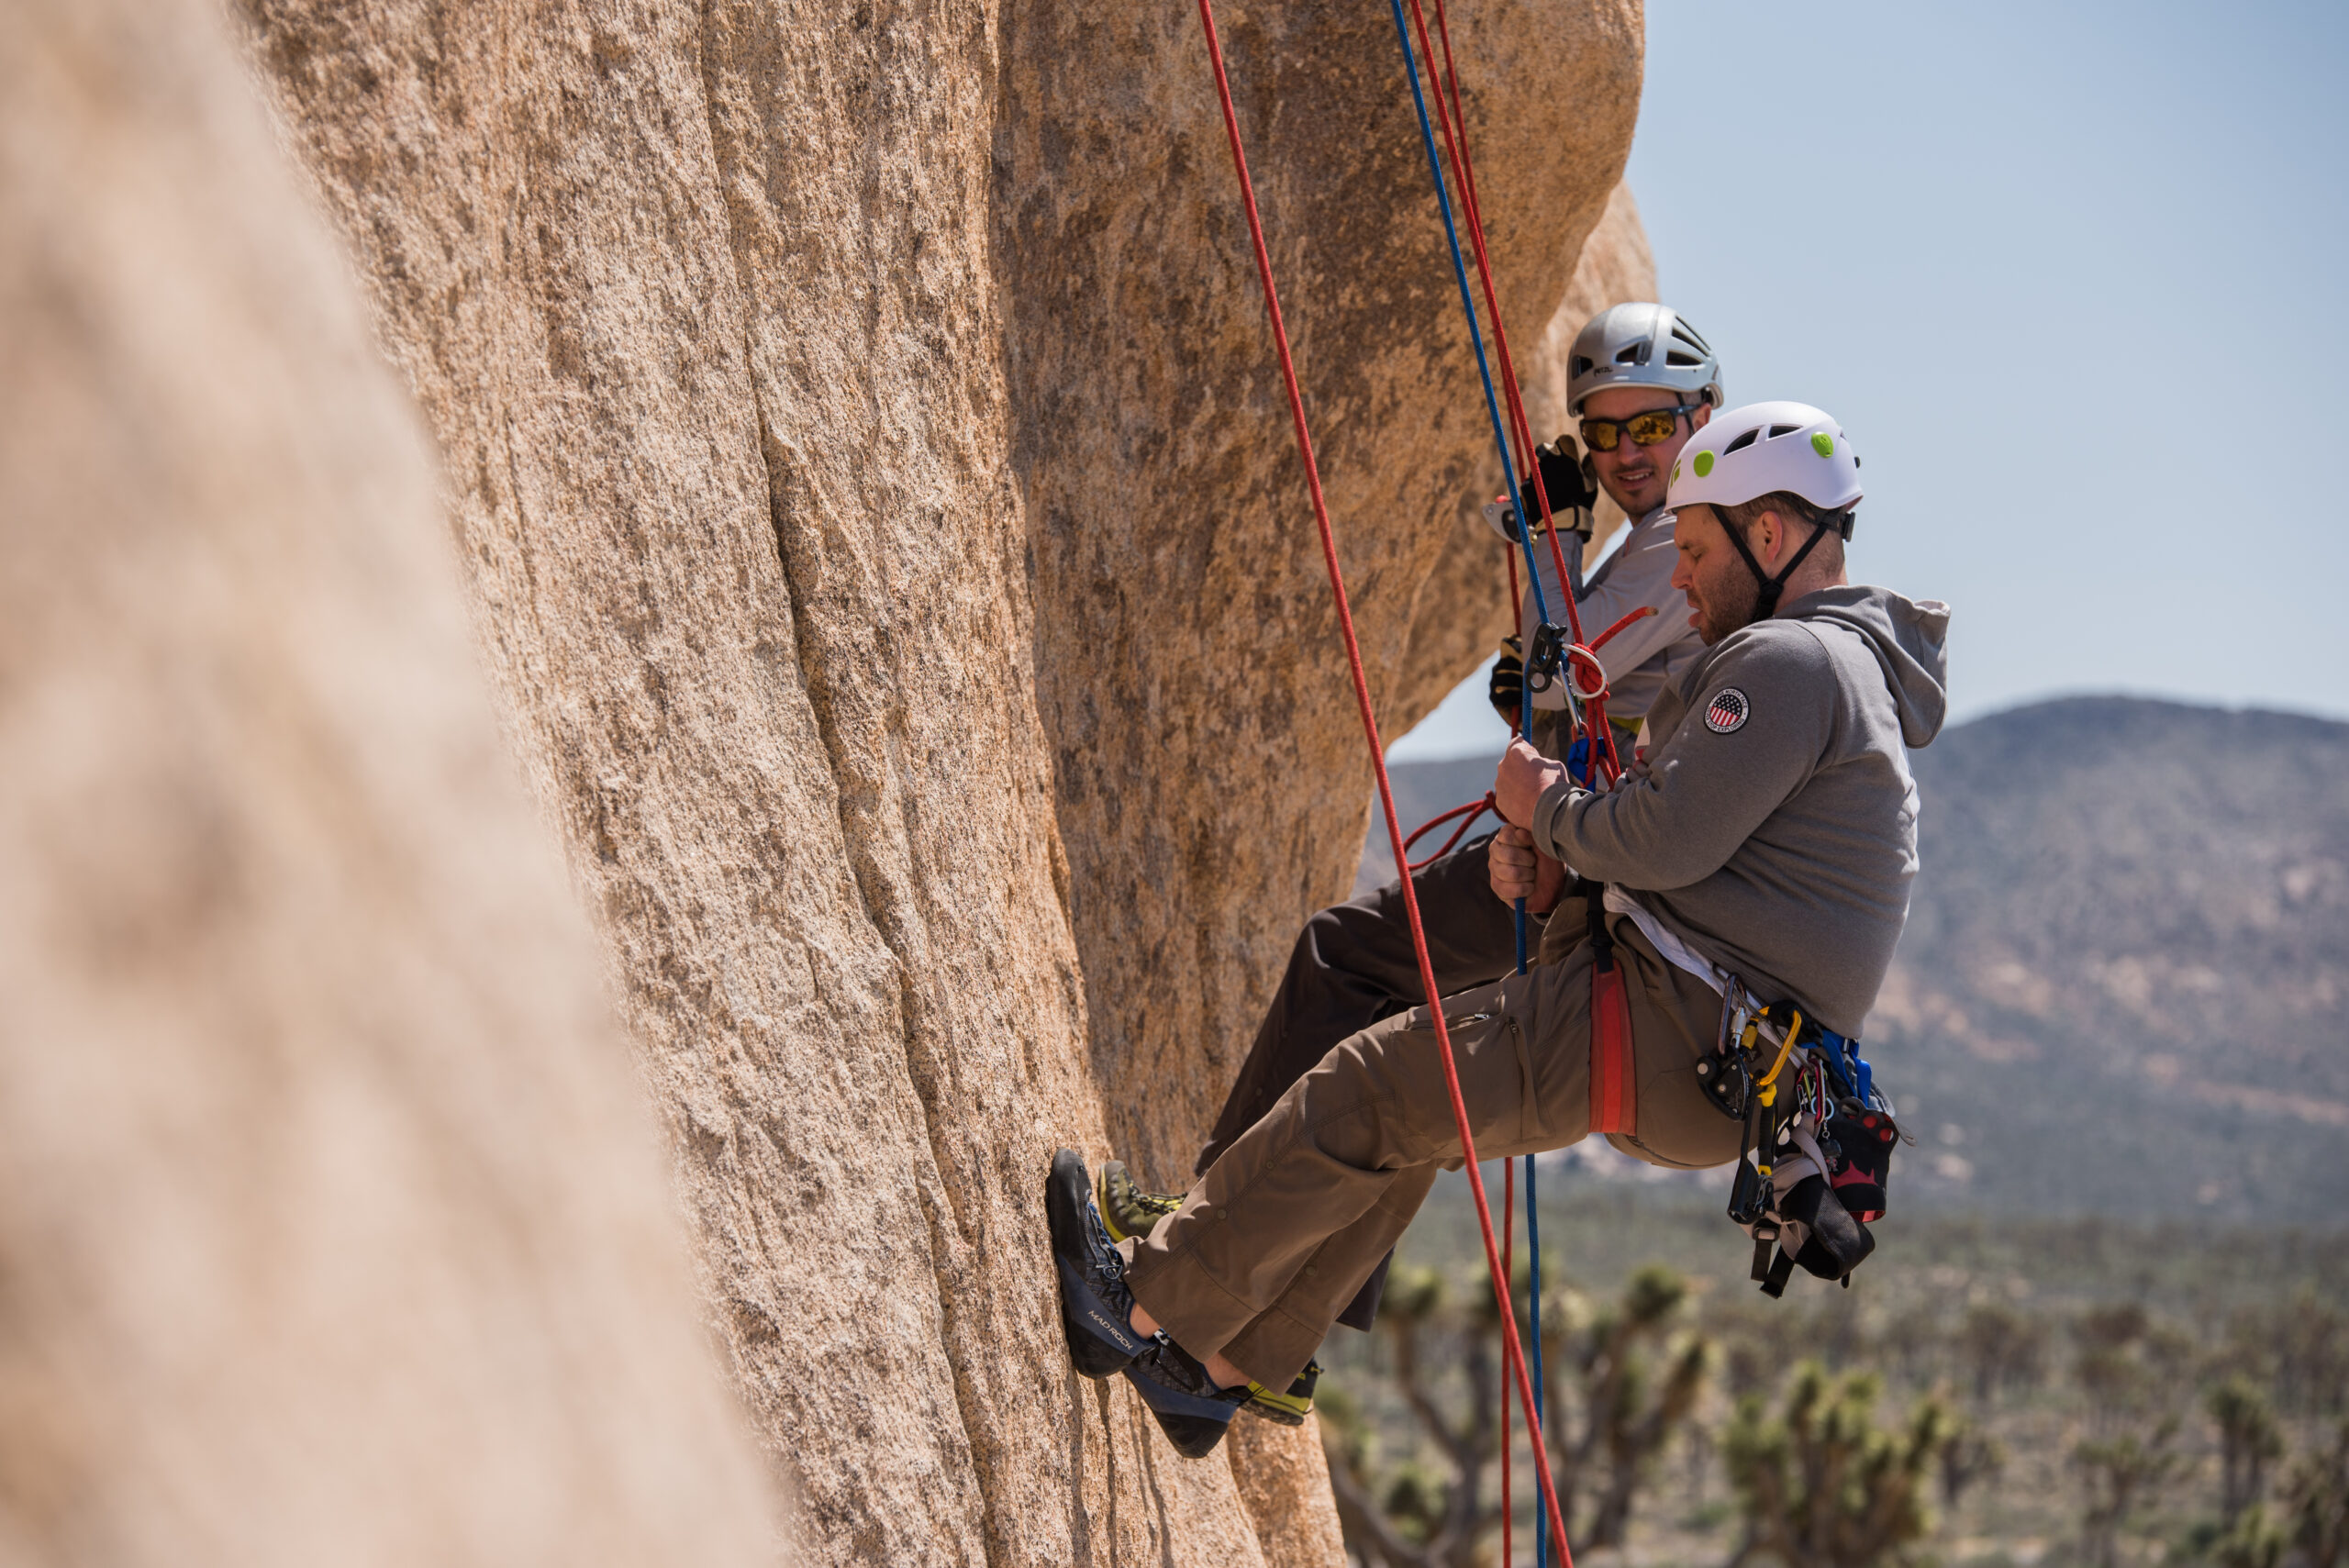 A climber practing rappelling with the help of a guide who is side by side with him. There is a mountain and Joshua Trees behind them.